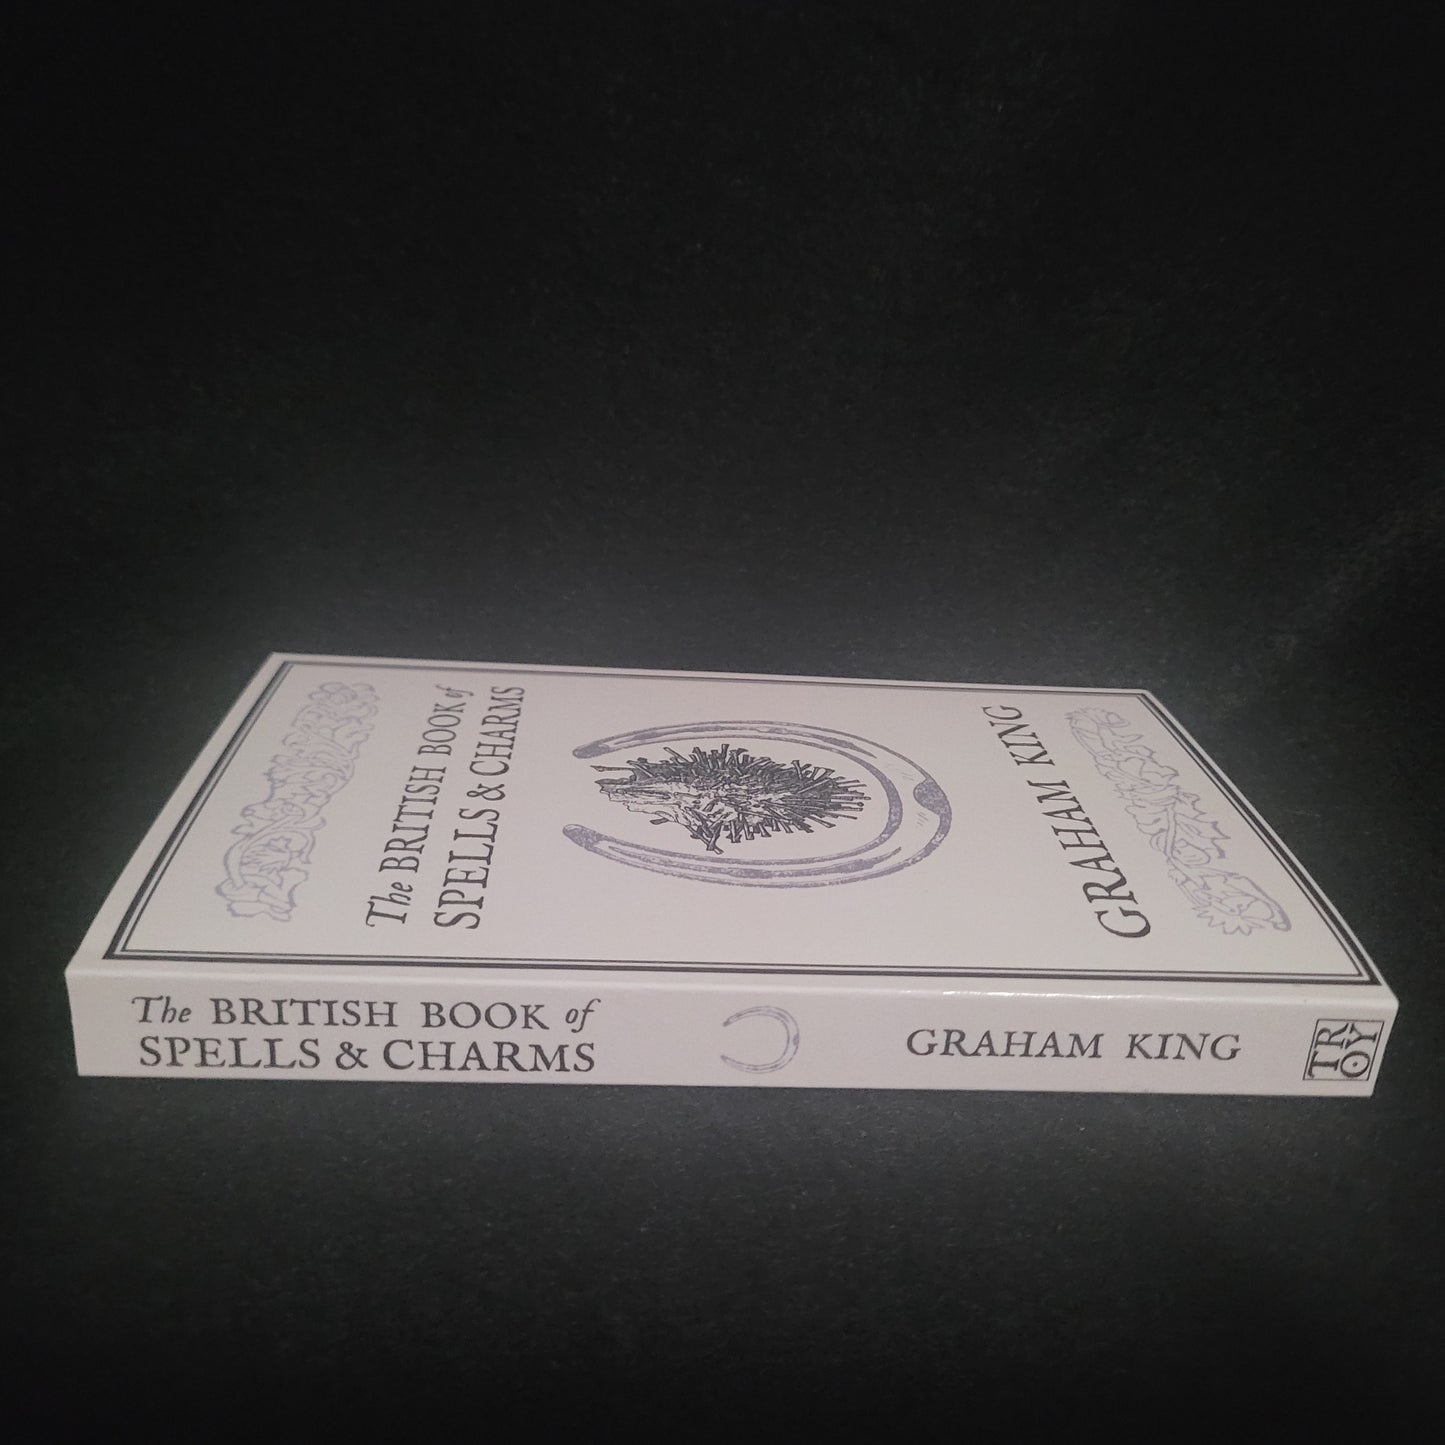 The British Book of Spells & Charms by Graham King (Troy Books, 2019) Paperback Black & White Edition